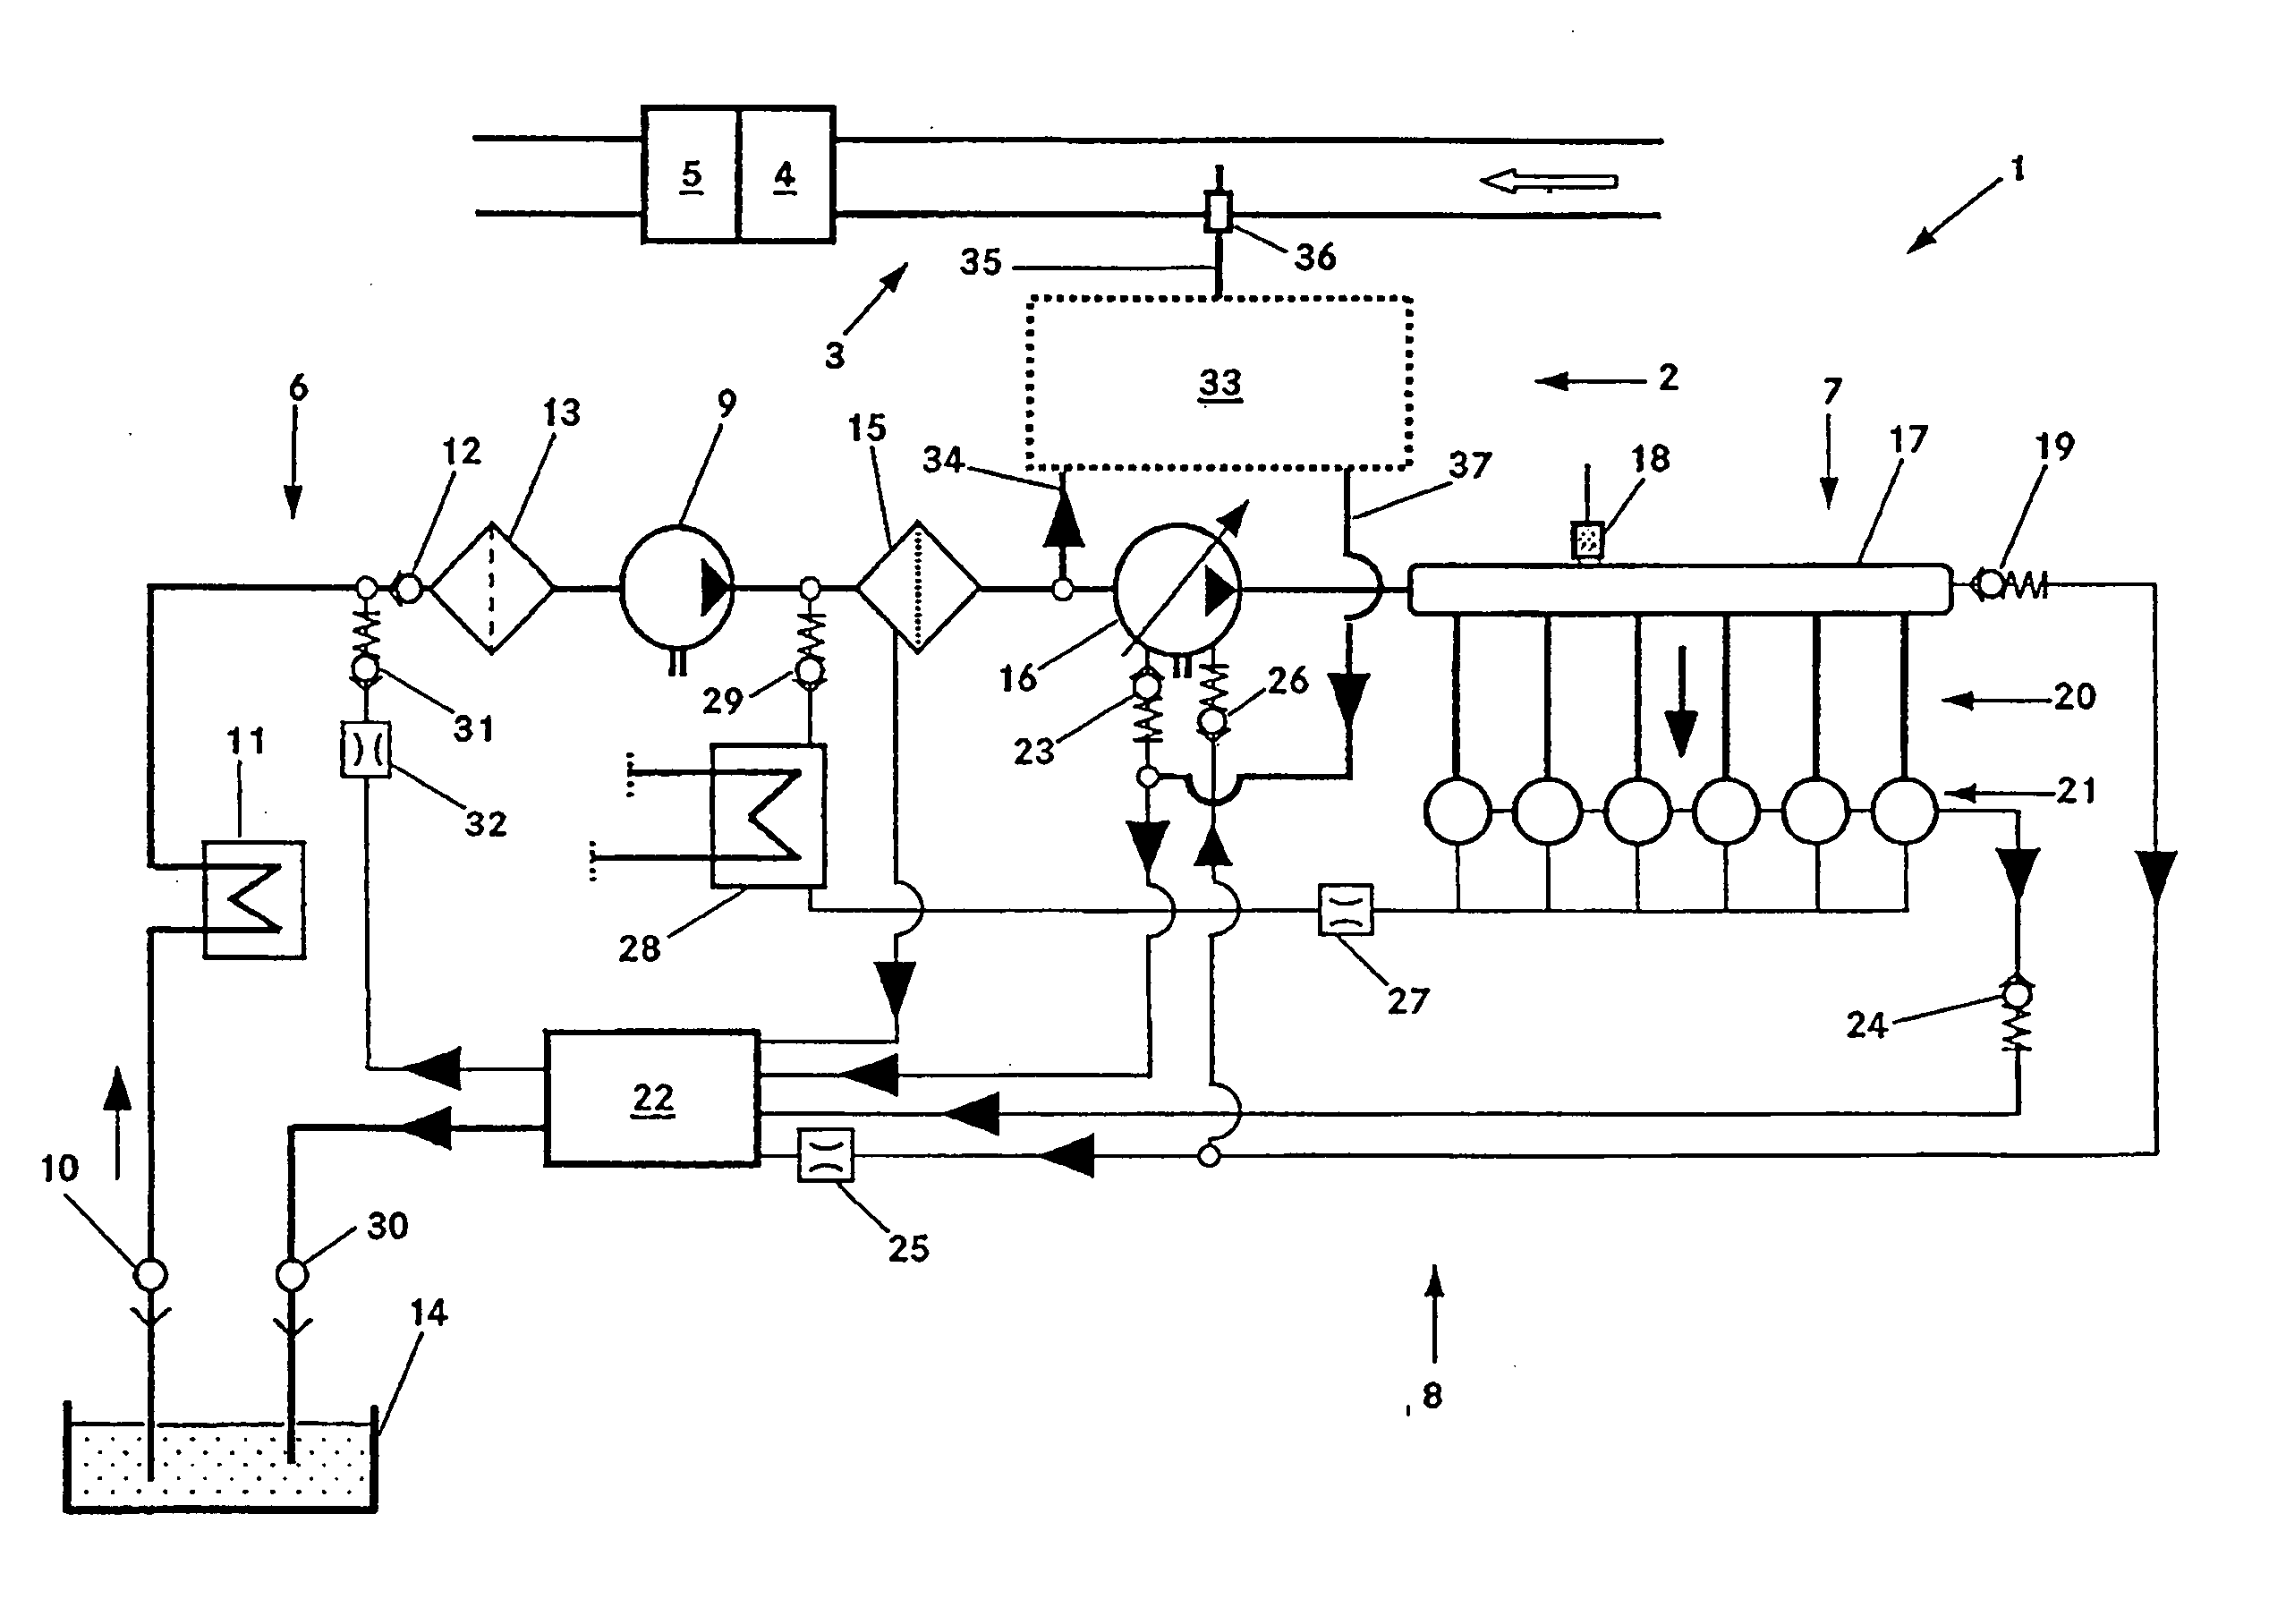 Injection system having a device for metering fuel into an exhaust system of an internal combustion engine and a method for this purpose